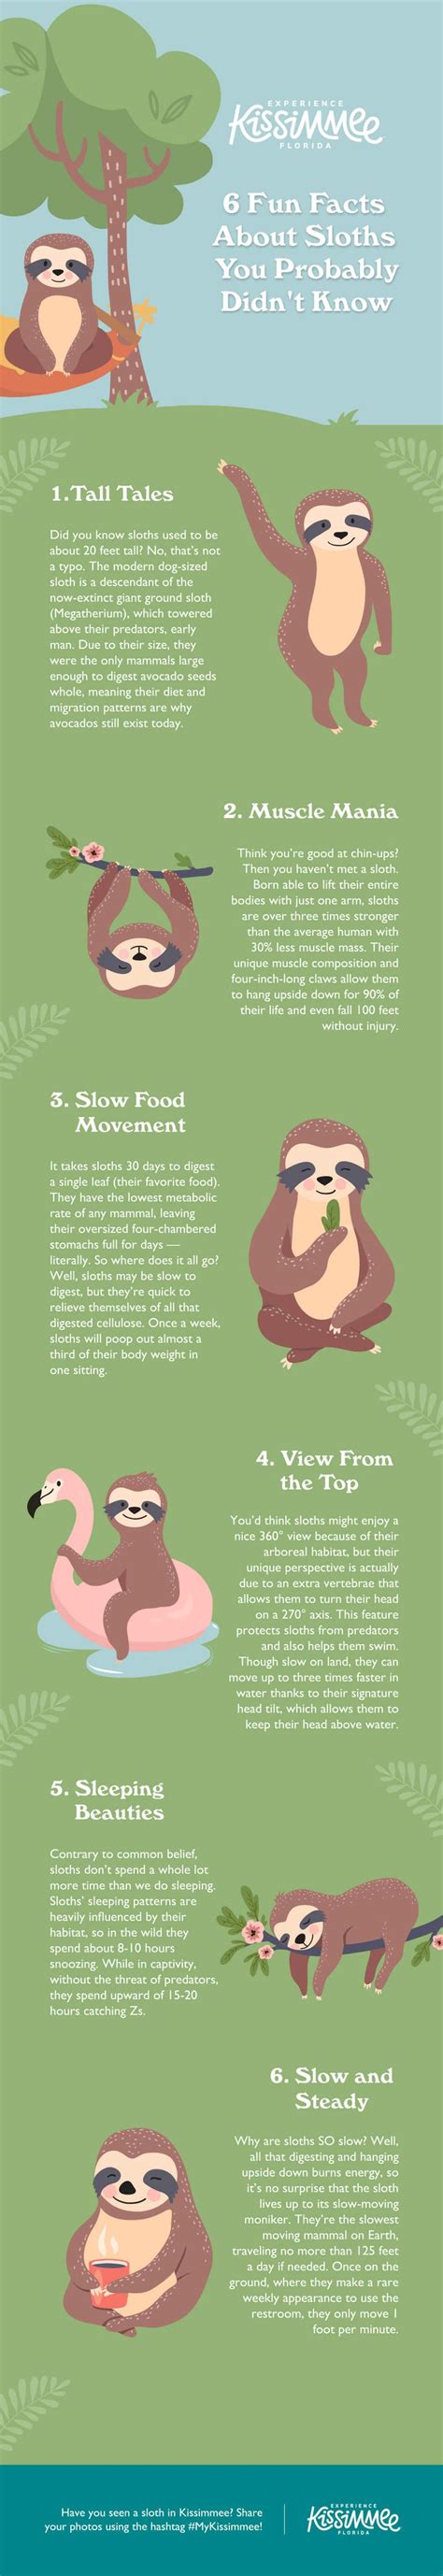 6 fun facts about sloths you probably didn t know fun facts about sloths sloth facts fun facts